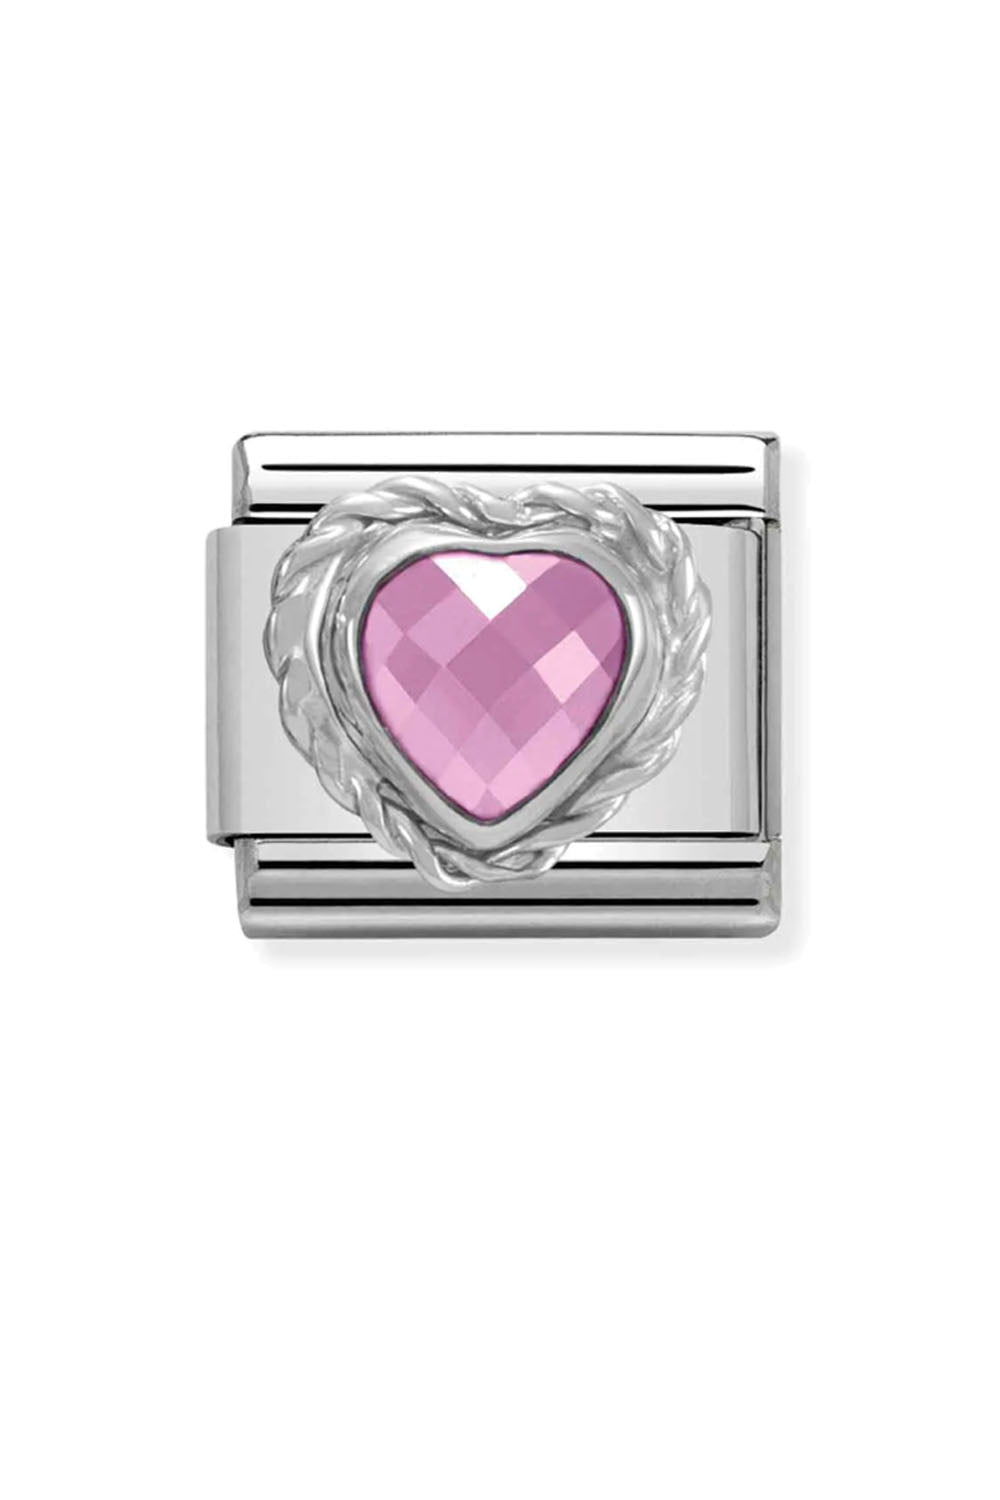 Heart faceted with 925 Sterling silver twisted setting and CZ Pink